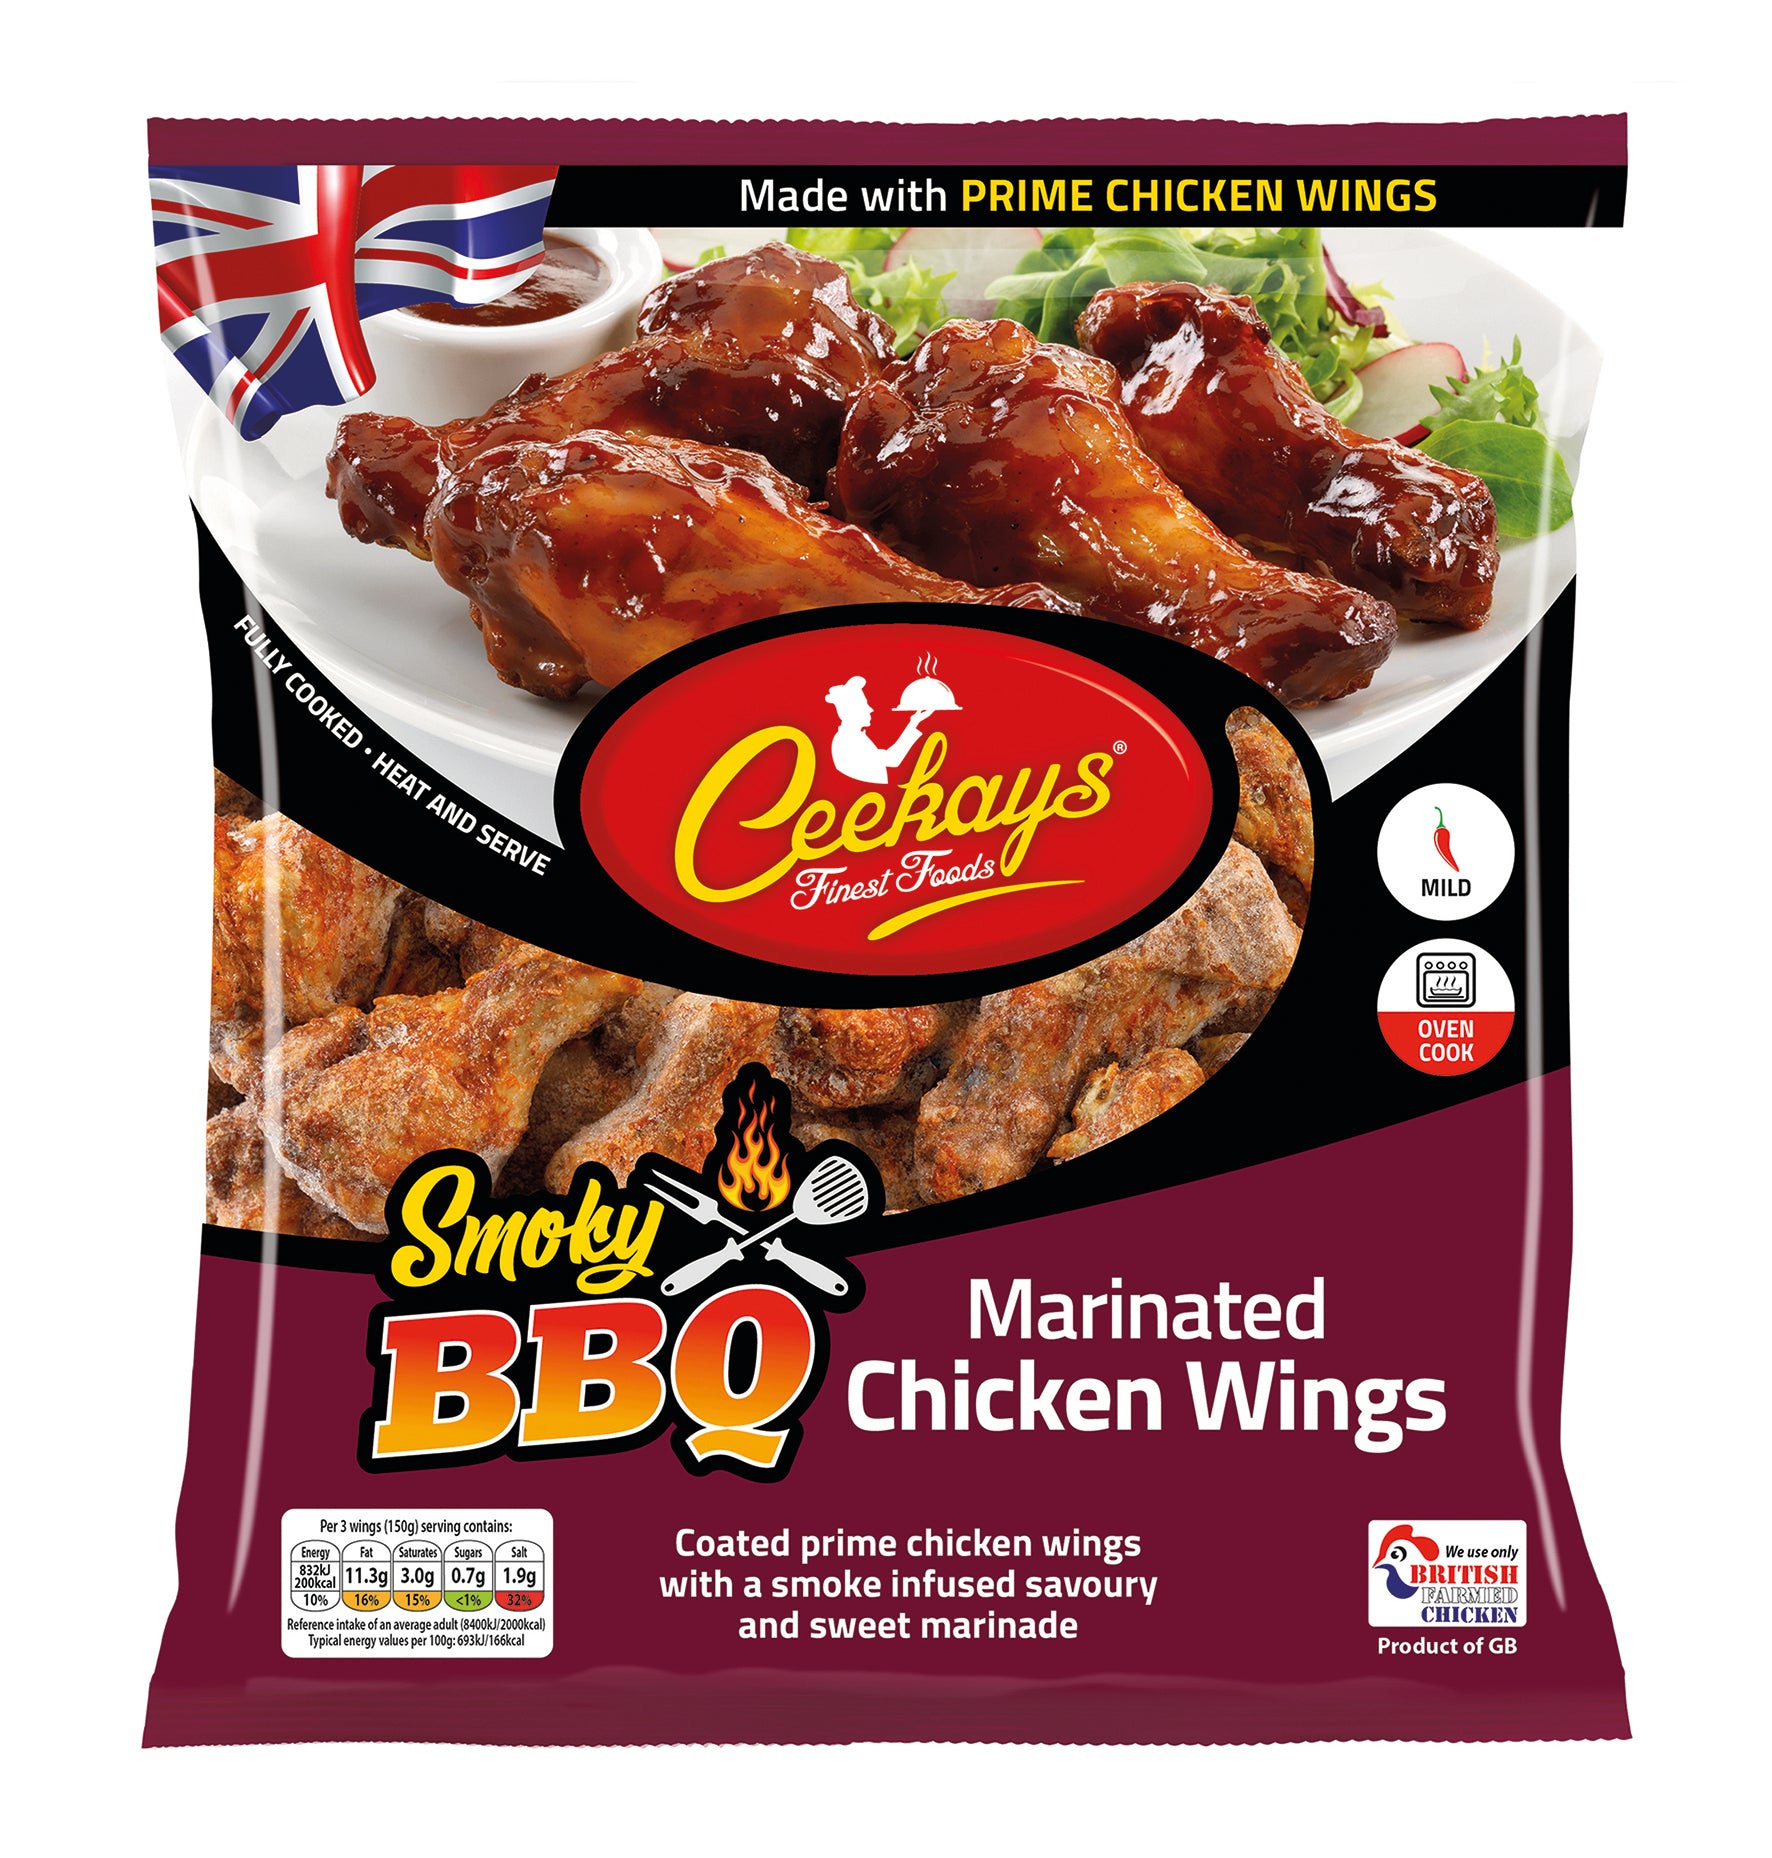 Ceekays Smoky BBQ Marinated Chicken Wings (600g) - The Halal Food Shop